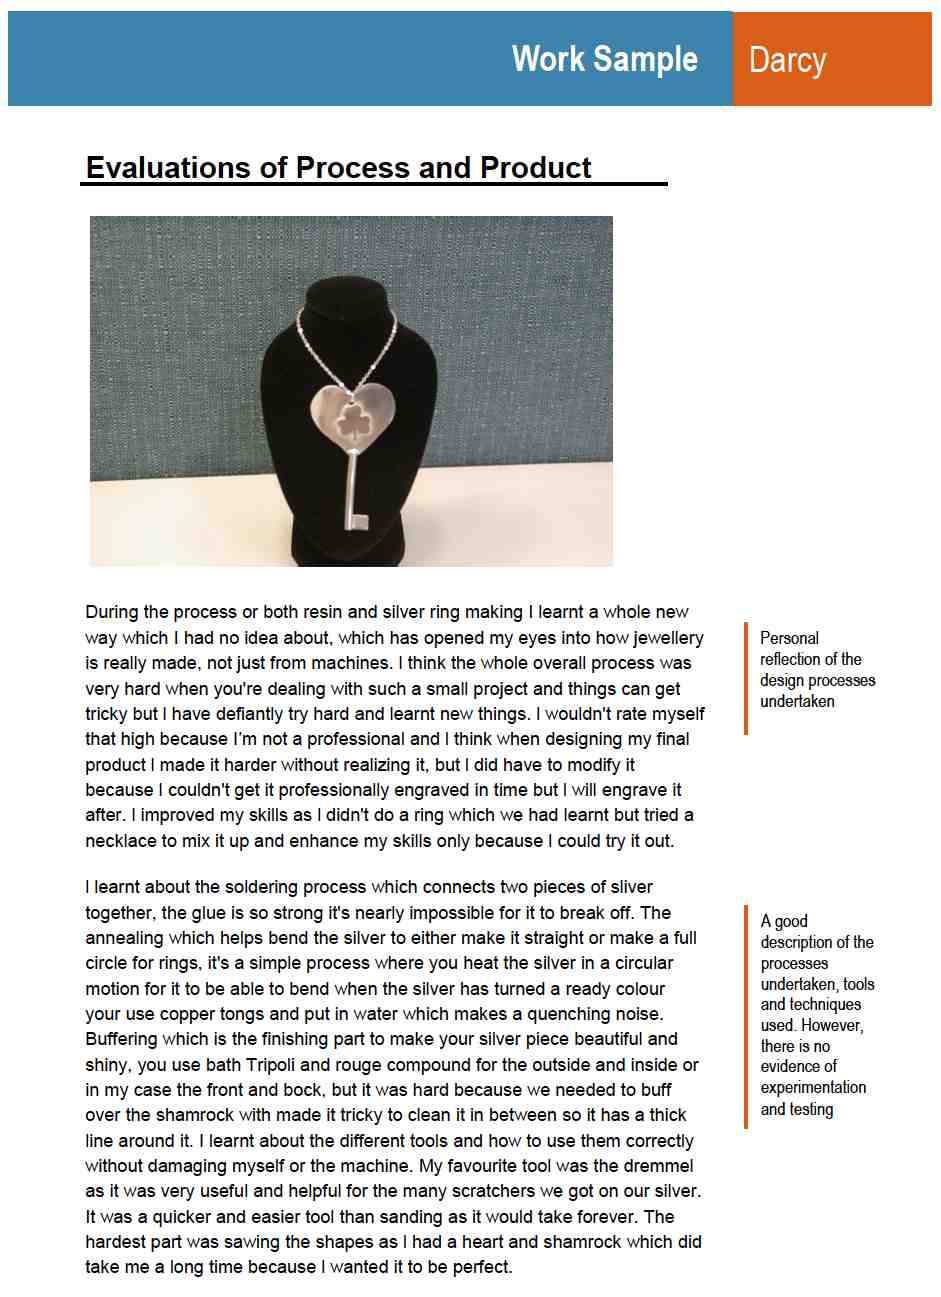 Final product and evaluation of a jewellery project - Darcy